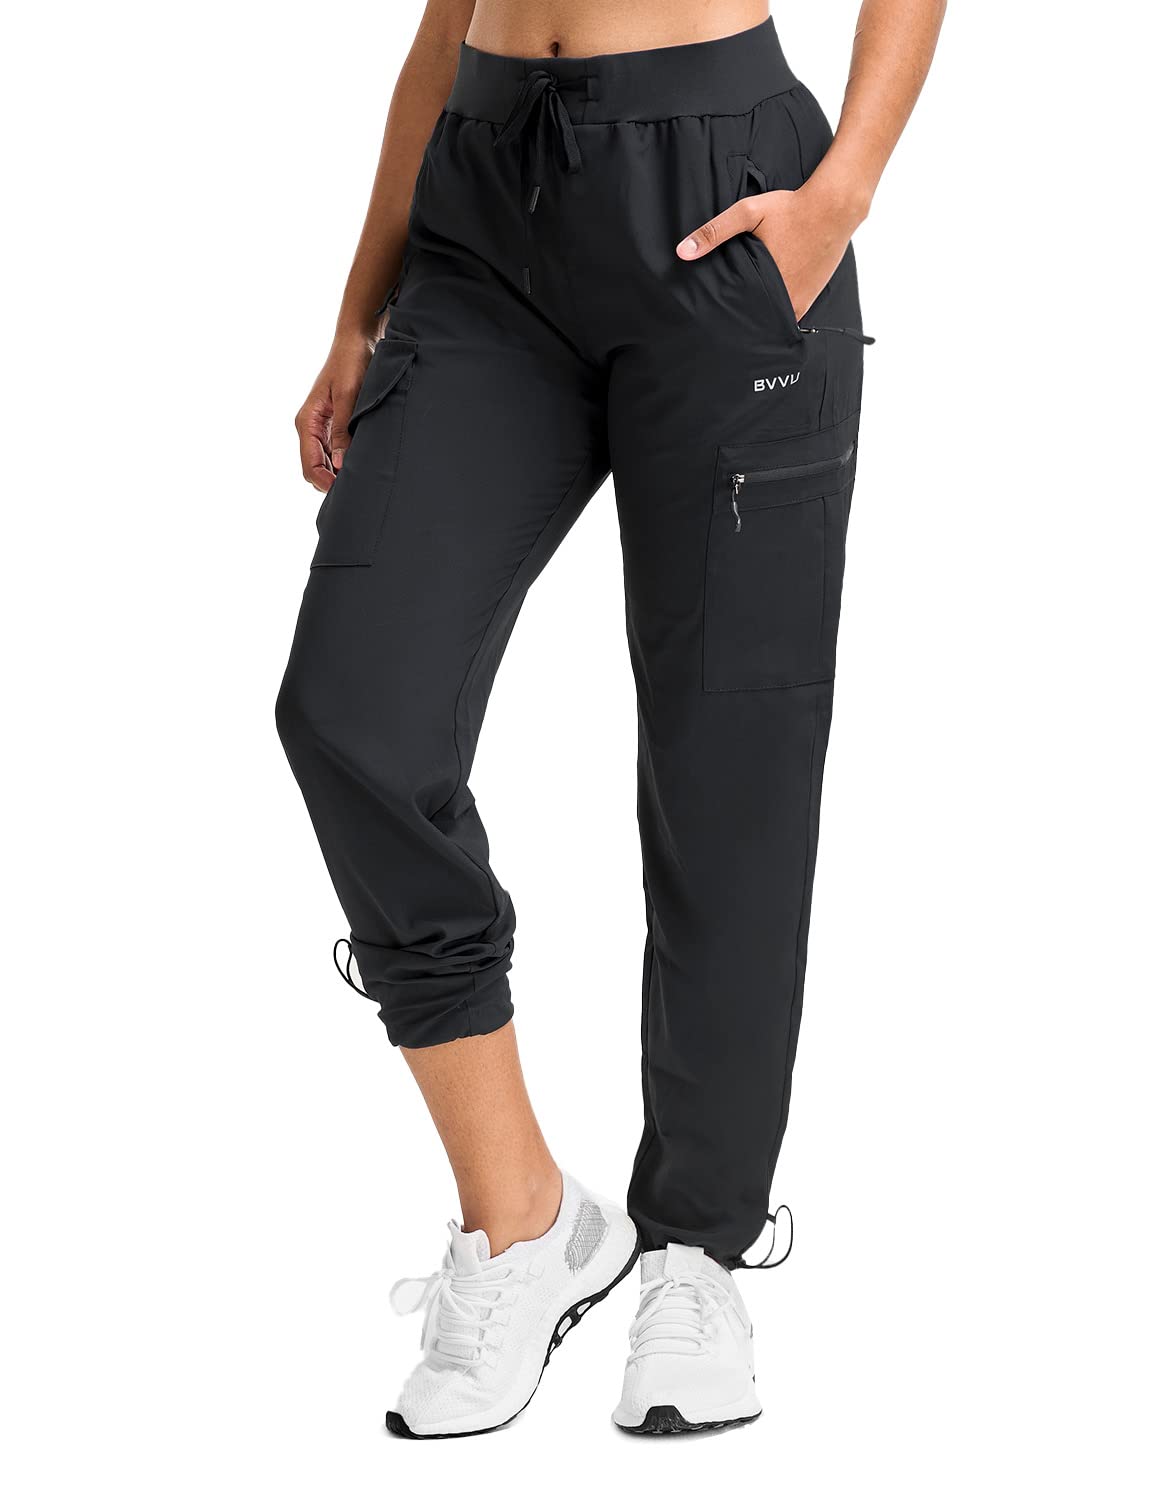 GymBrave Women's Hiking Cargo Pants Quick Dry Outdoor Camping Capris Water  Resistant UPF 50 with Zipper Pockets Black Medium